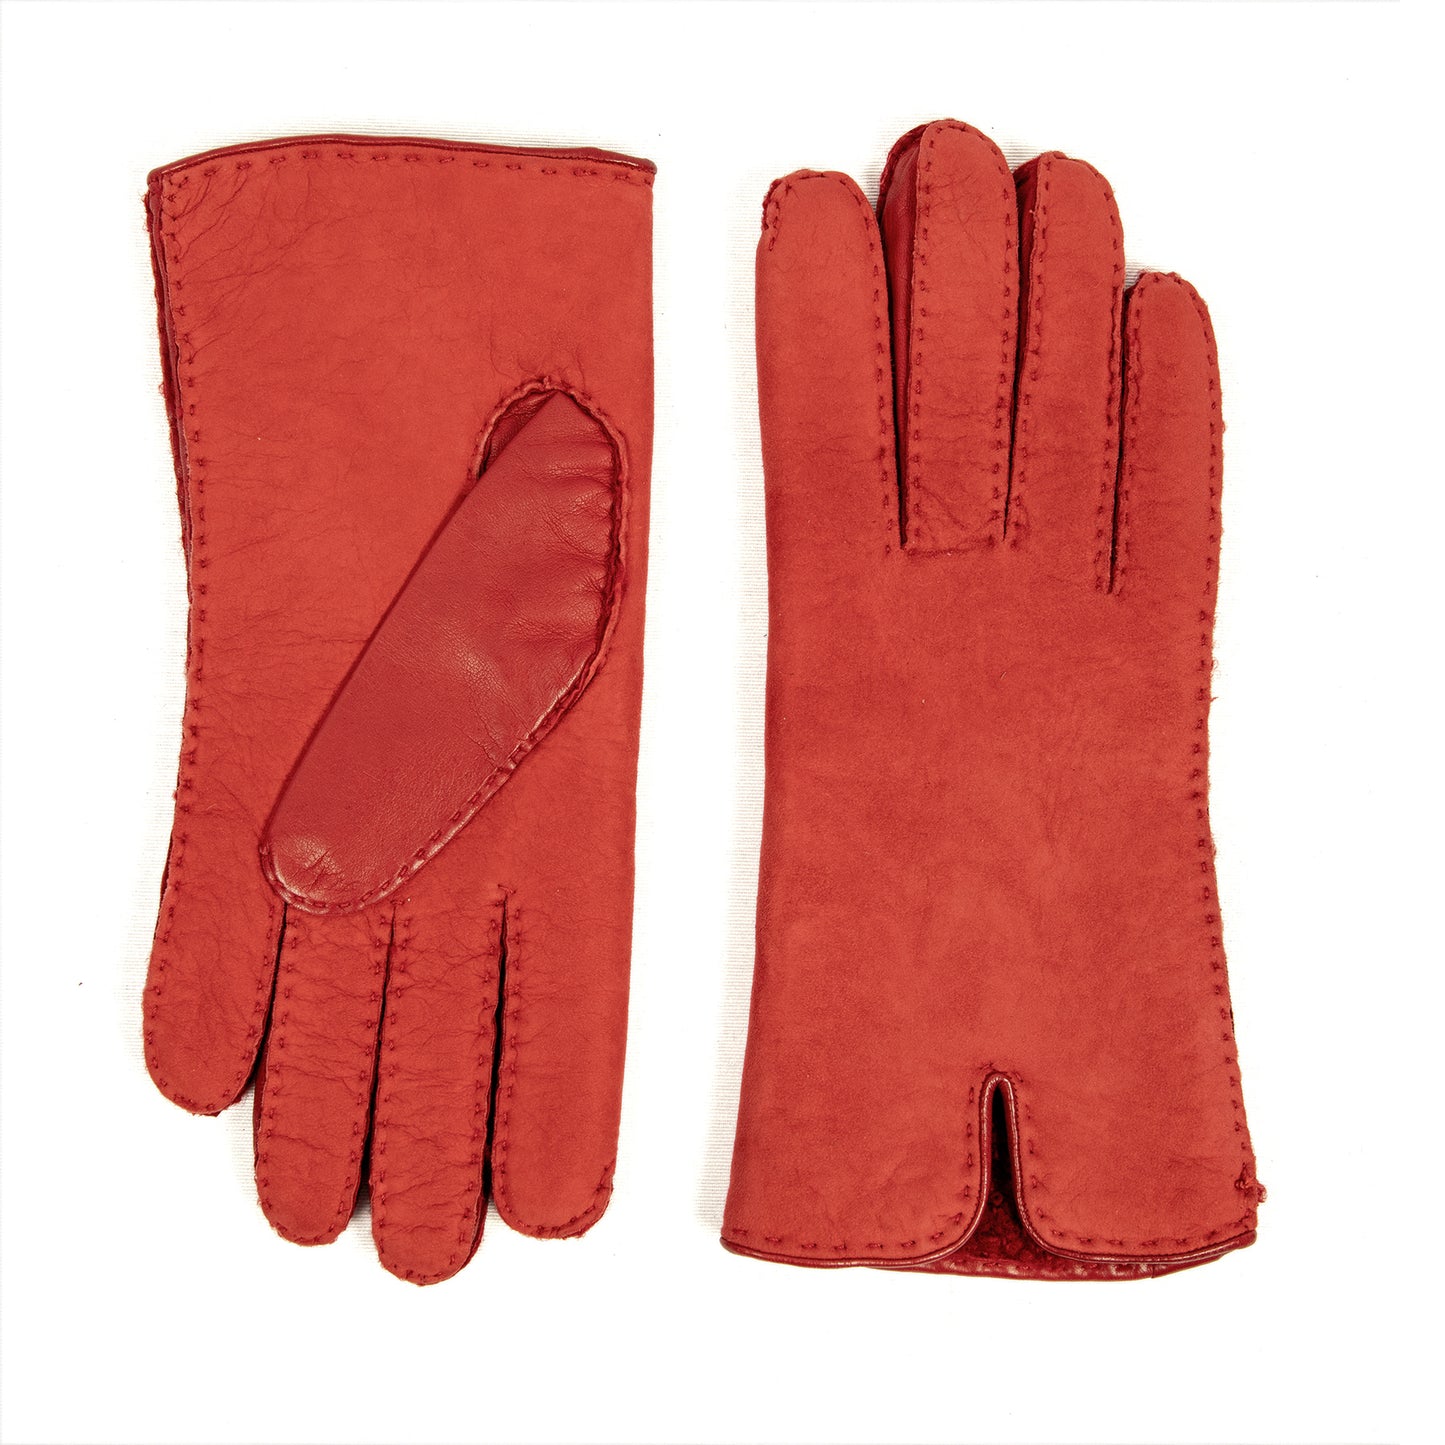 Women's red curly lambskin gloves with with nappa leather piping detail